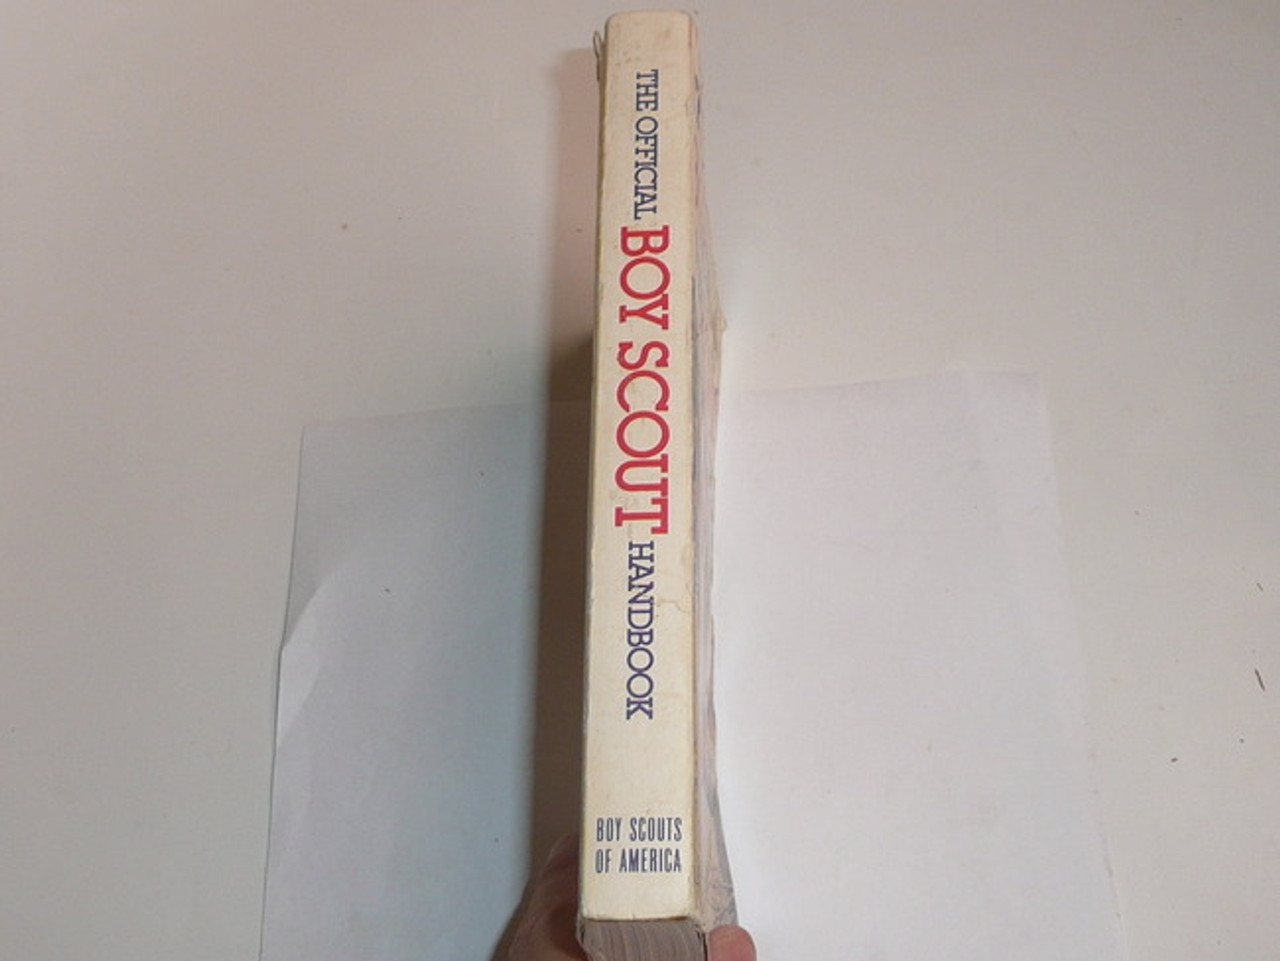 1983 Boy Scout Handbook, Ninth Edition, Seventh Printing, Used condition, Last Norman Rockwell Cover